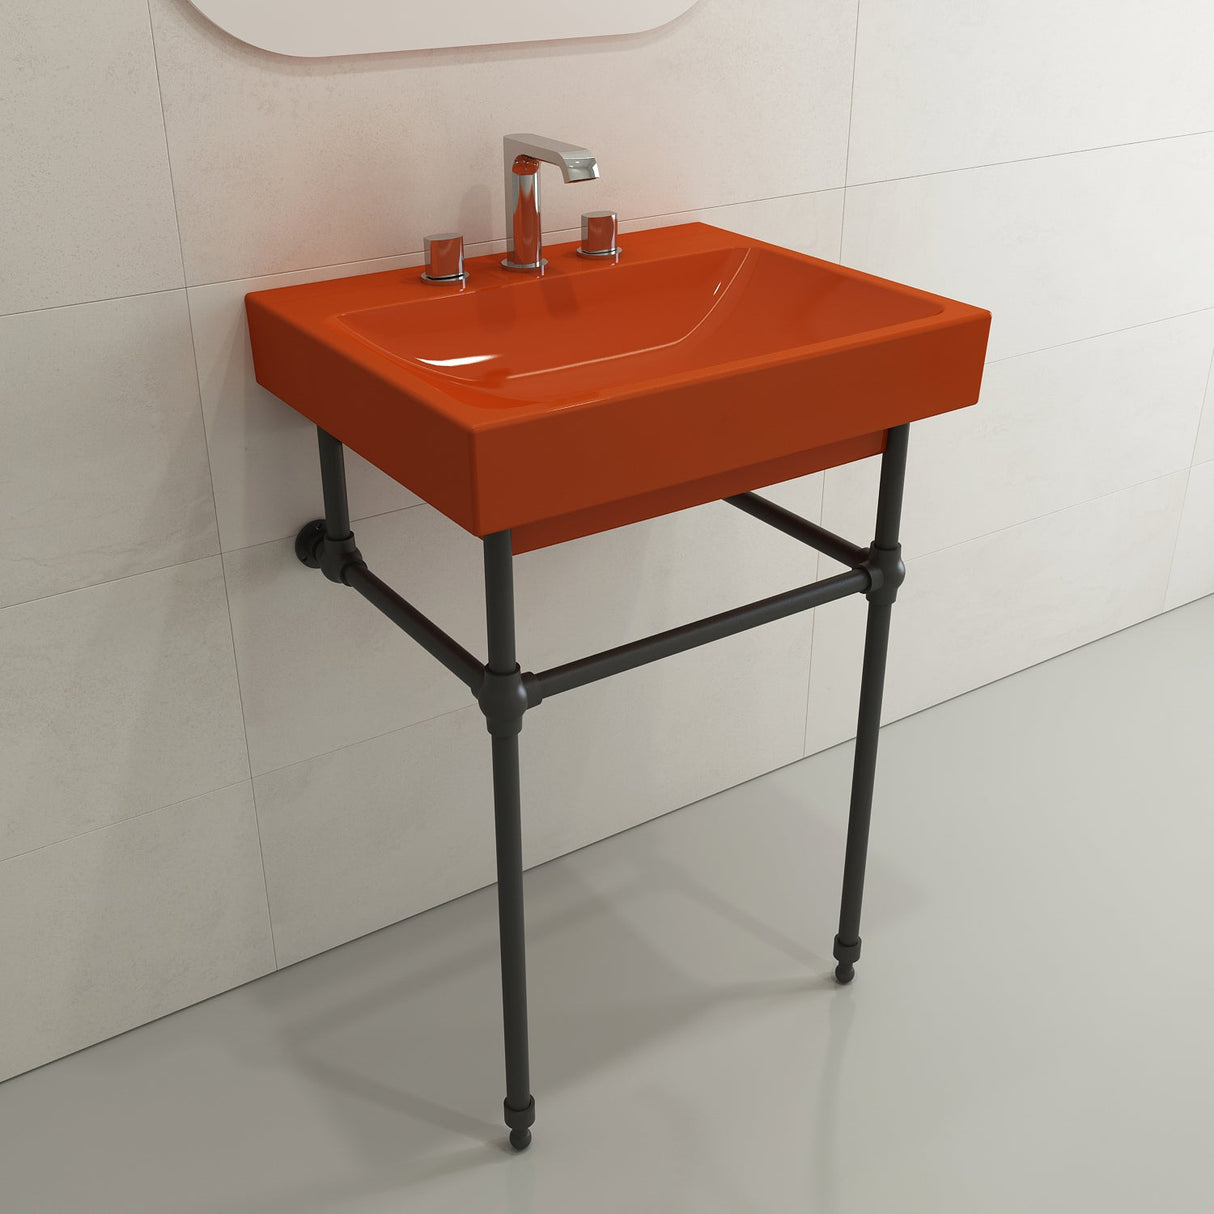 BOCCHI 1077-012-0127 Scala Arch Wall-Mounted Sink Fireclay 23.75 in. 3-Hole in Orange